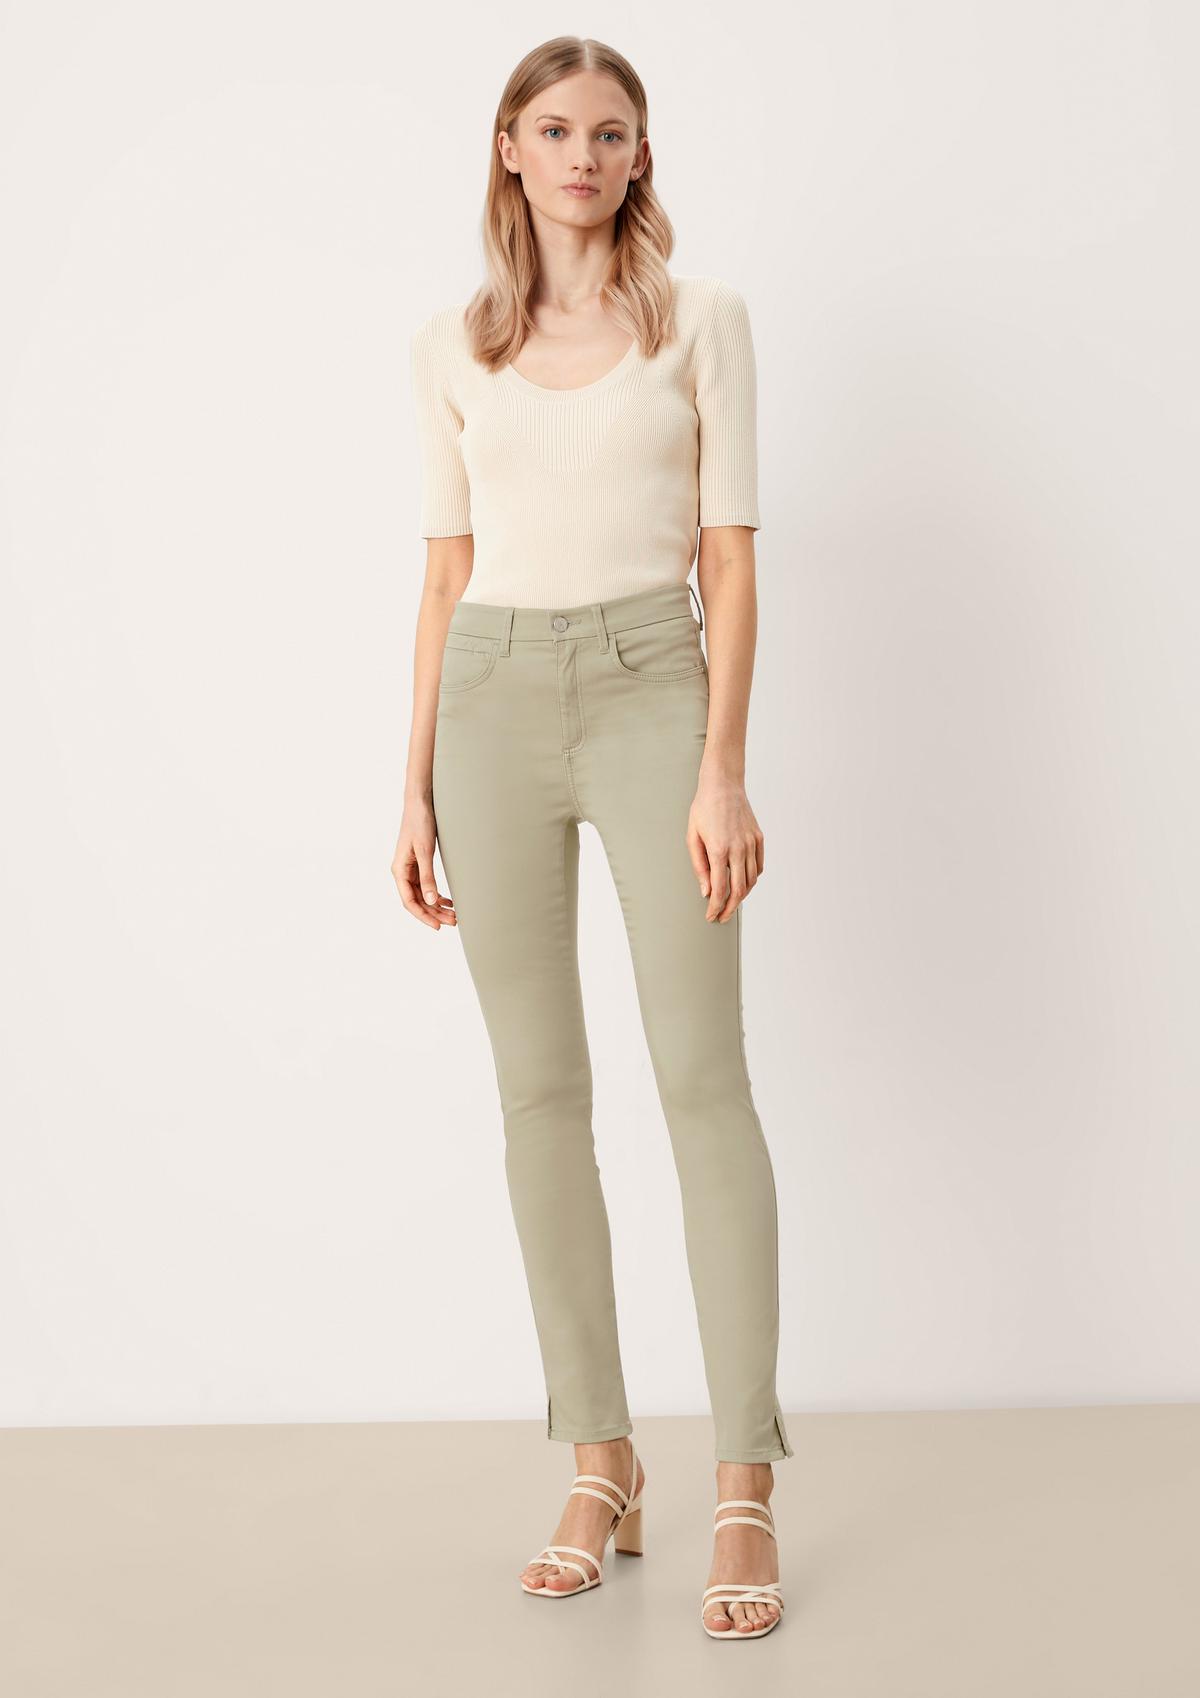 s.Oliver Skinny: trousers with a slim leg